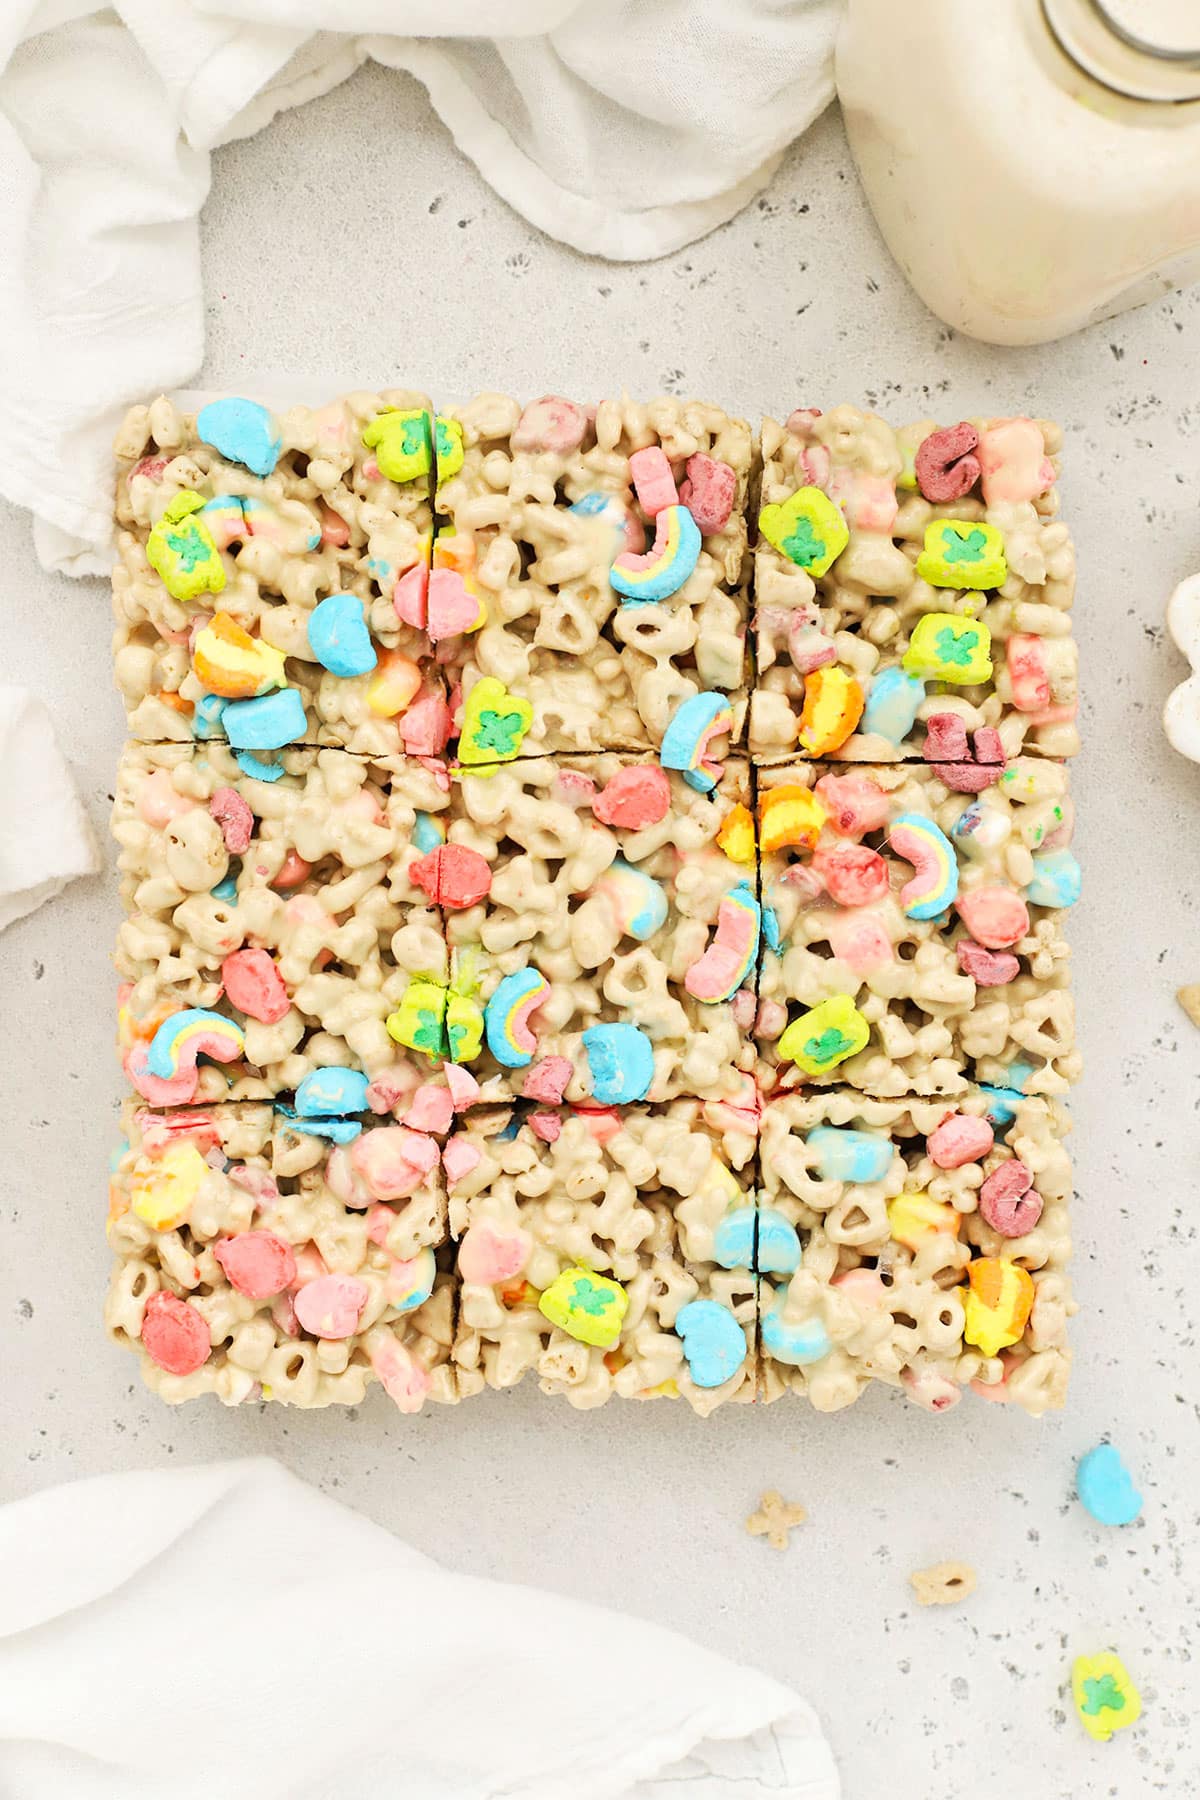 Lucky charms treats cut into squares